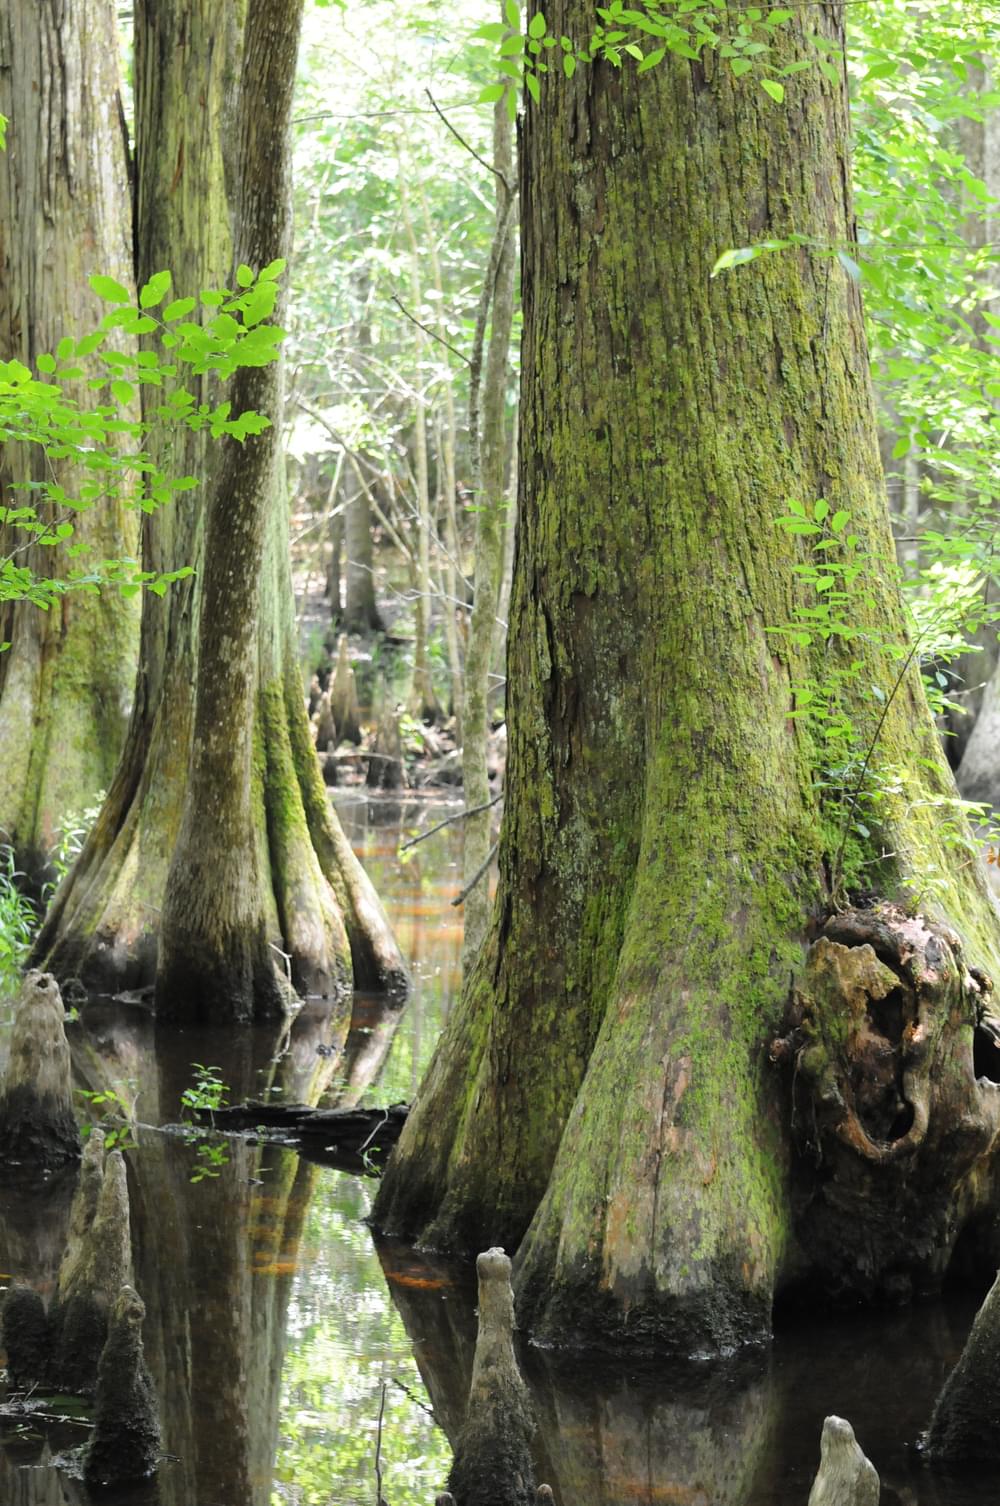 Ancient Giants-1000+ year-old Bald Cypress; Audubon Center at the Francis Beidler Forest